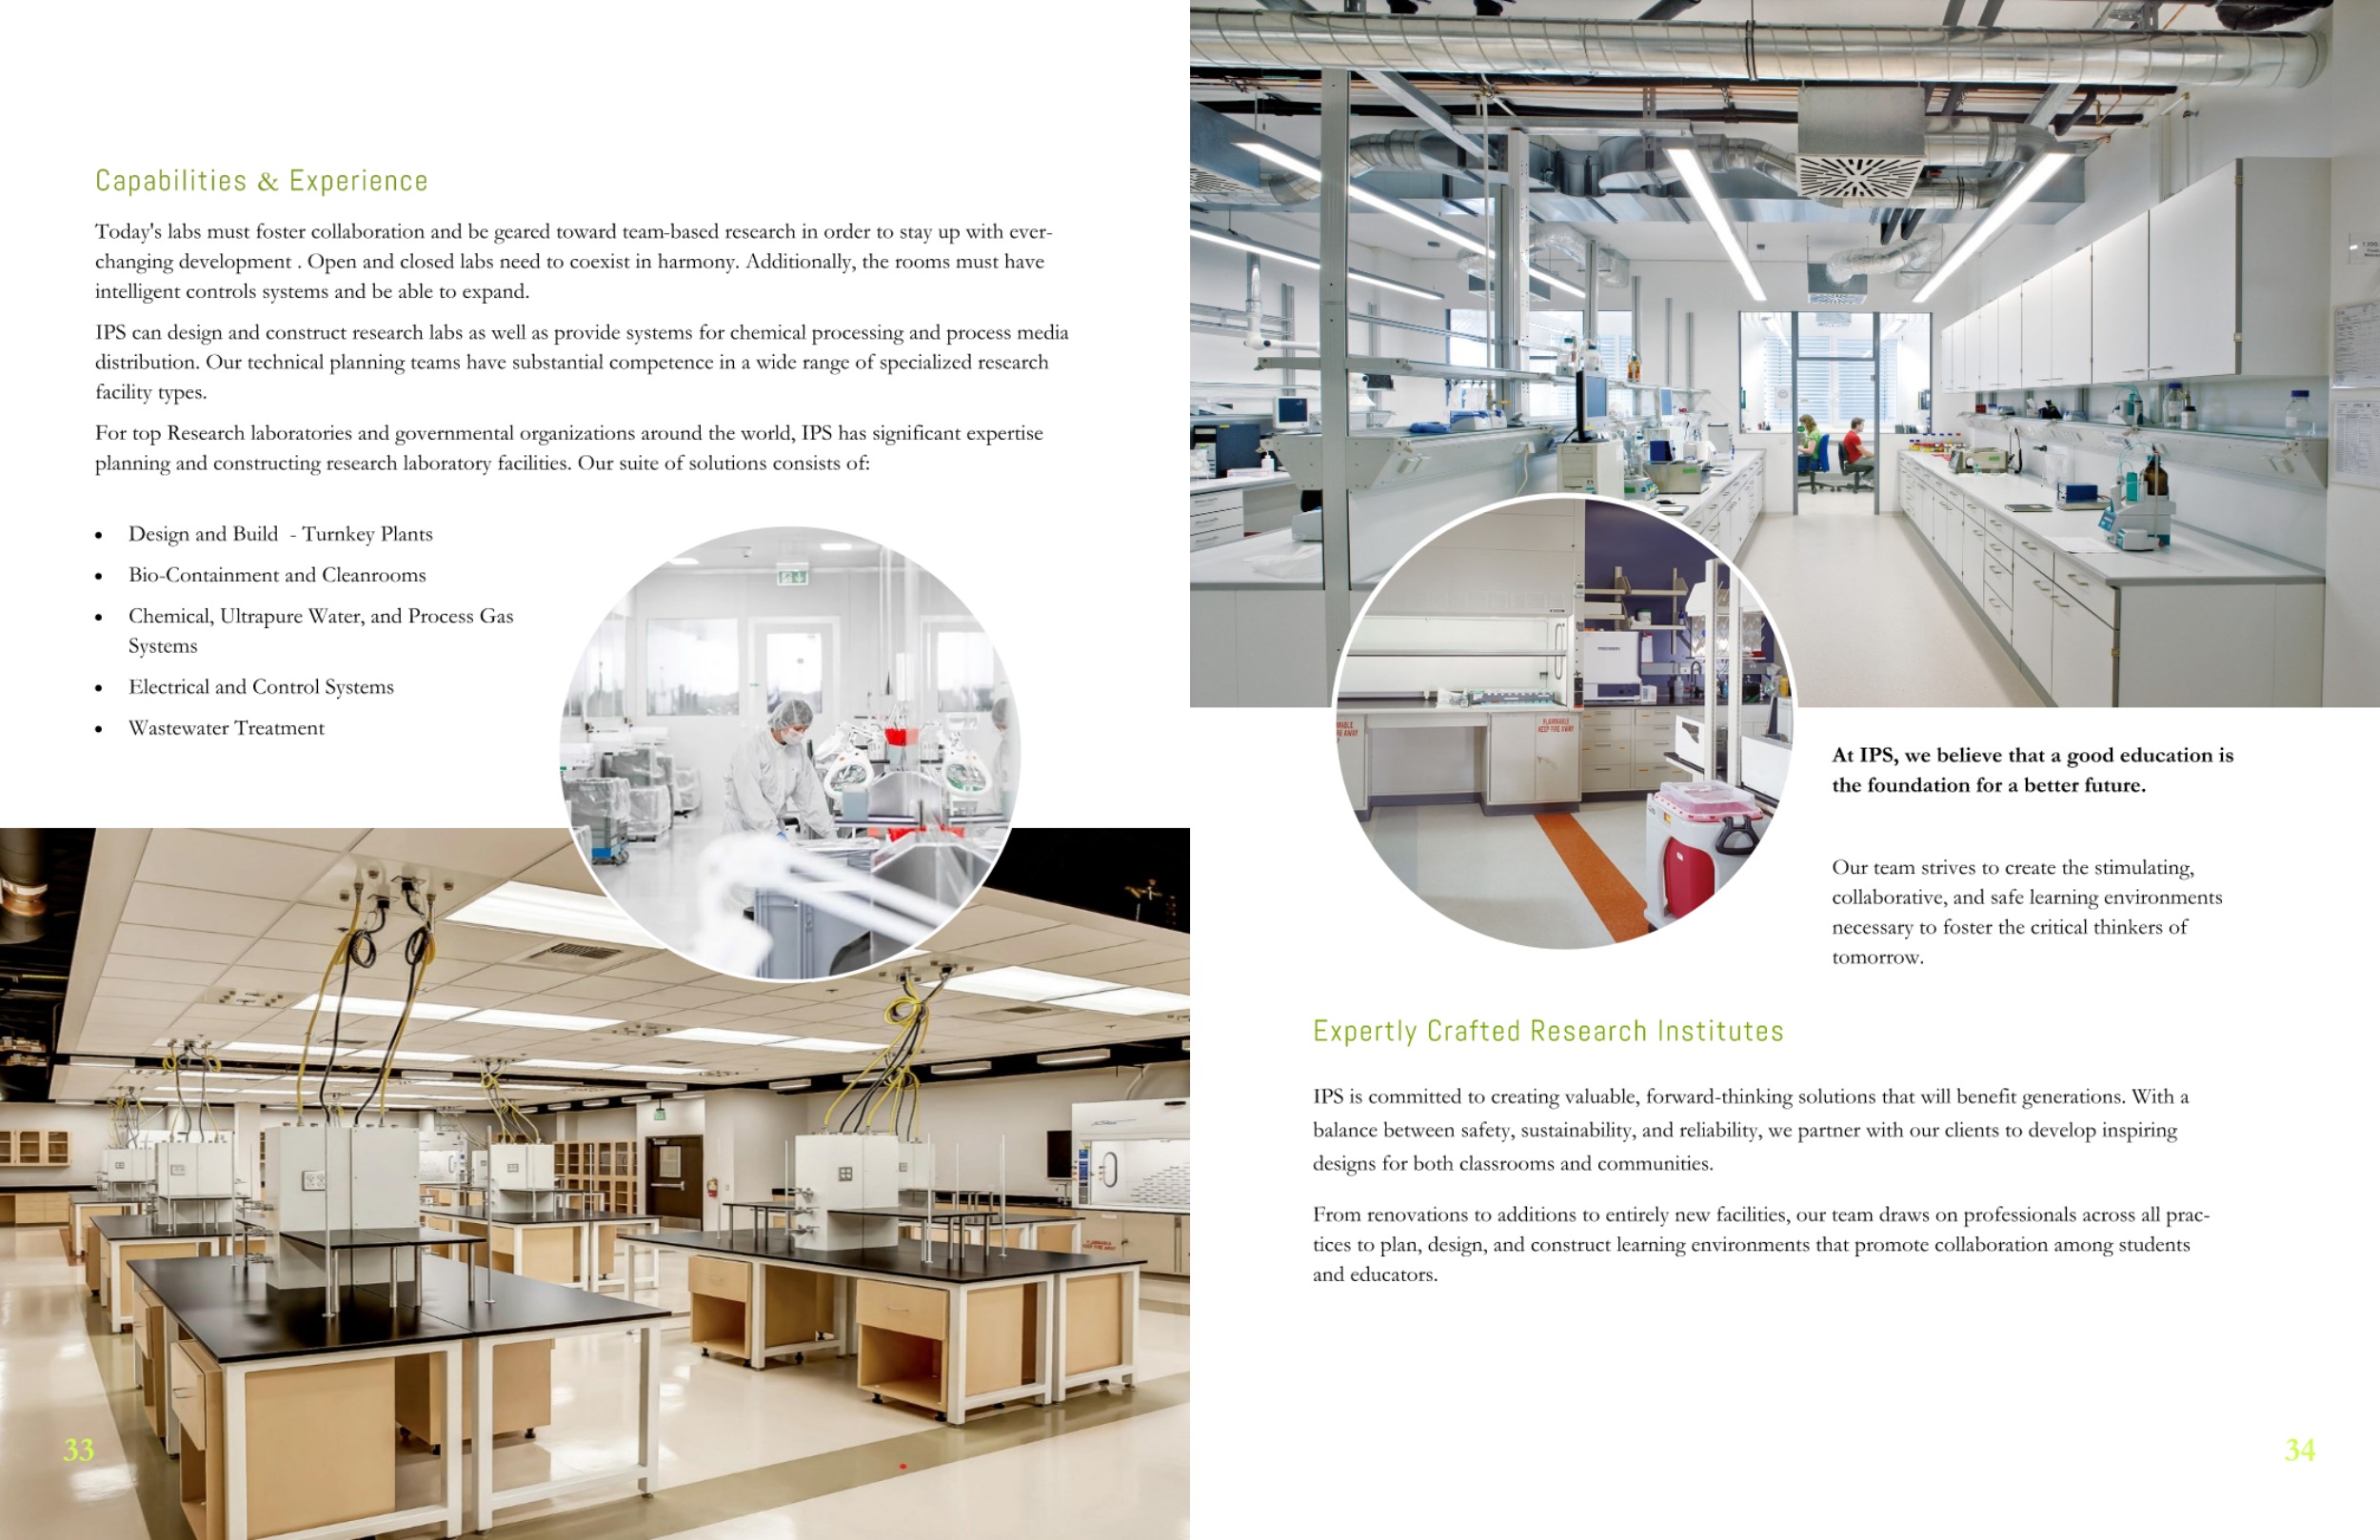 IPS Capabilities Booklet with Laboratory Research Institute services, capabilities, and methods.